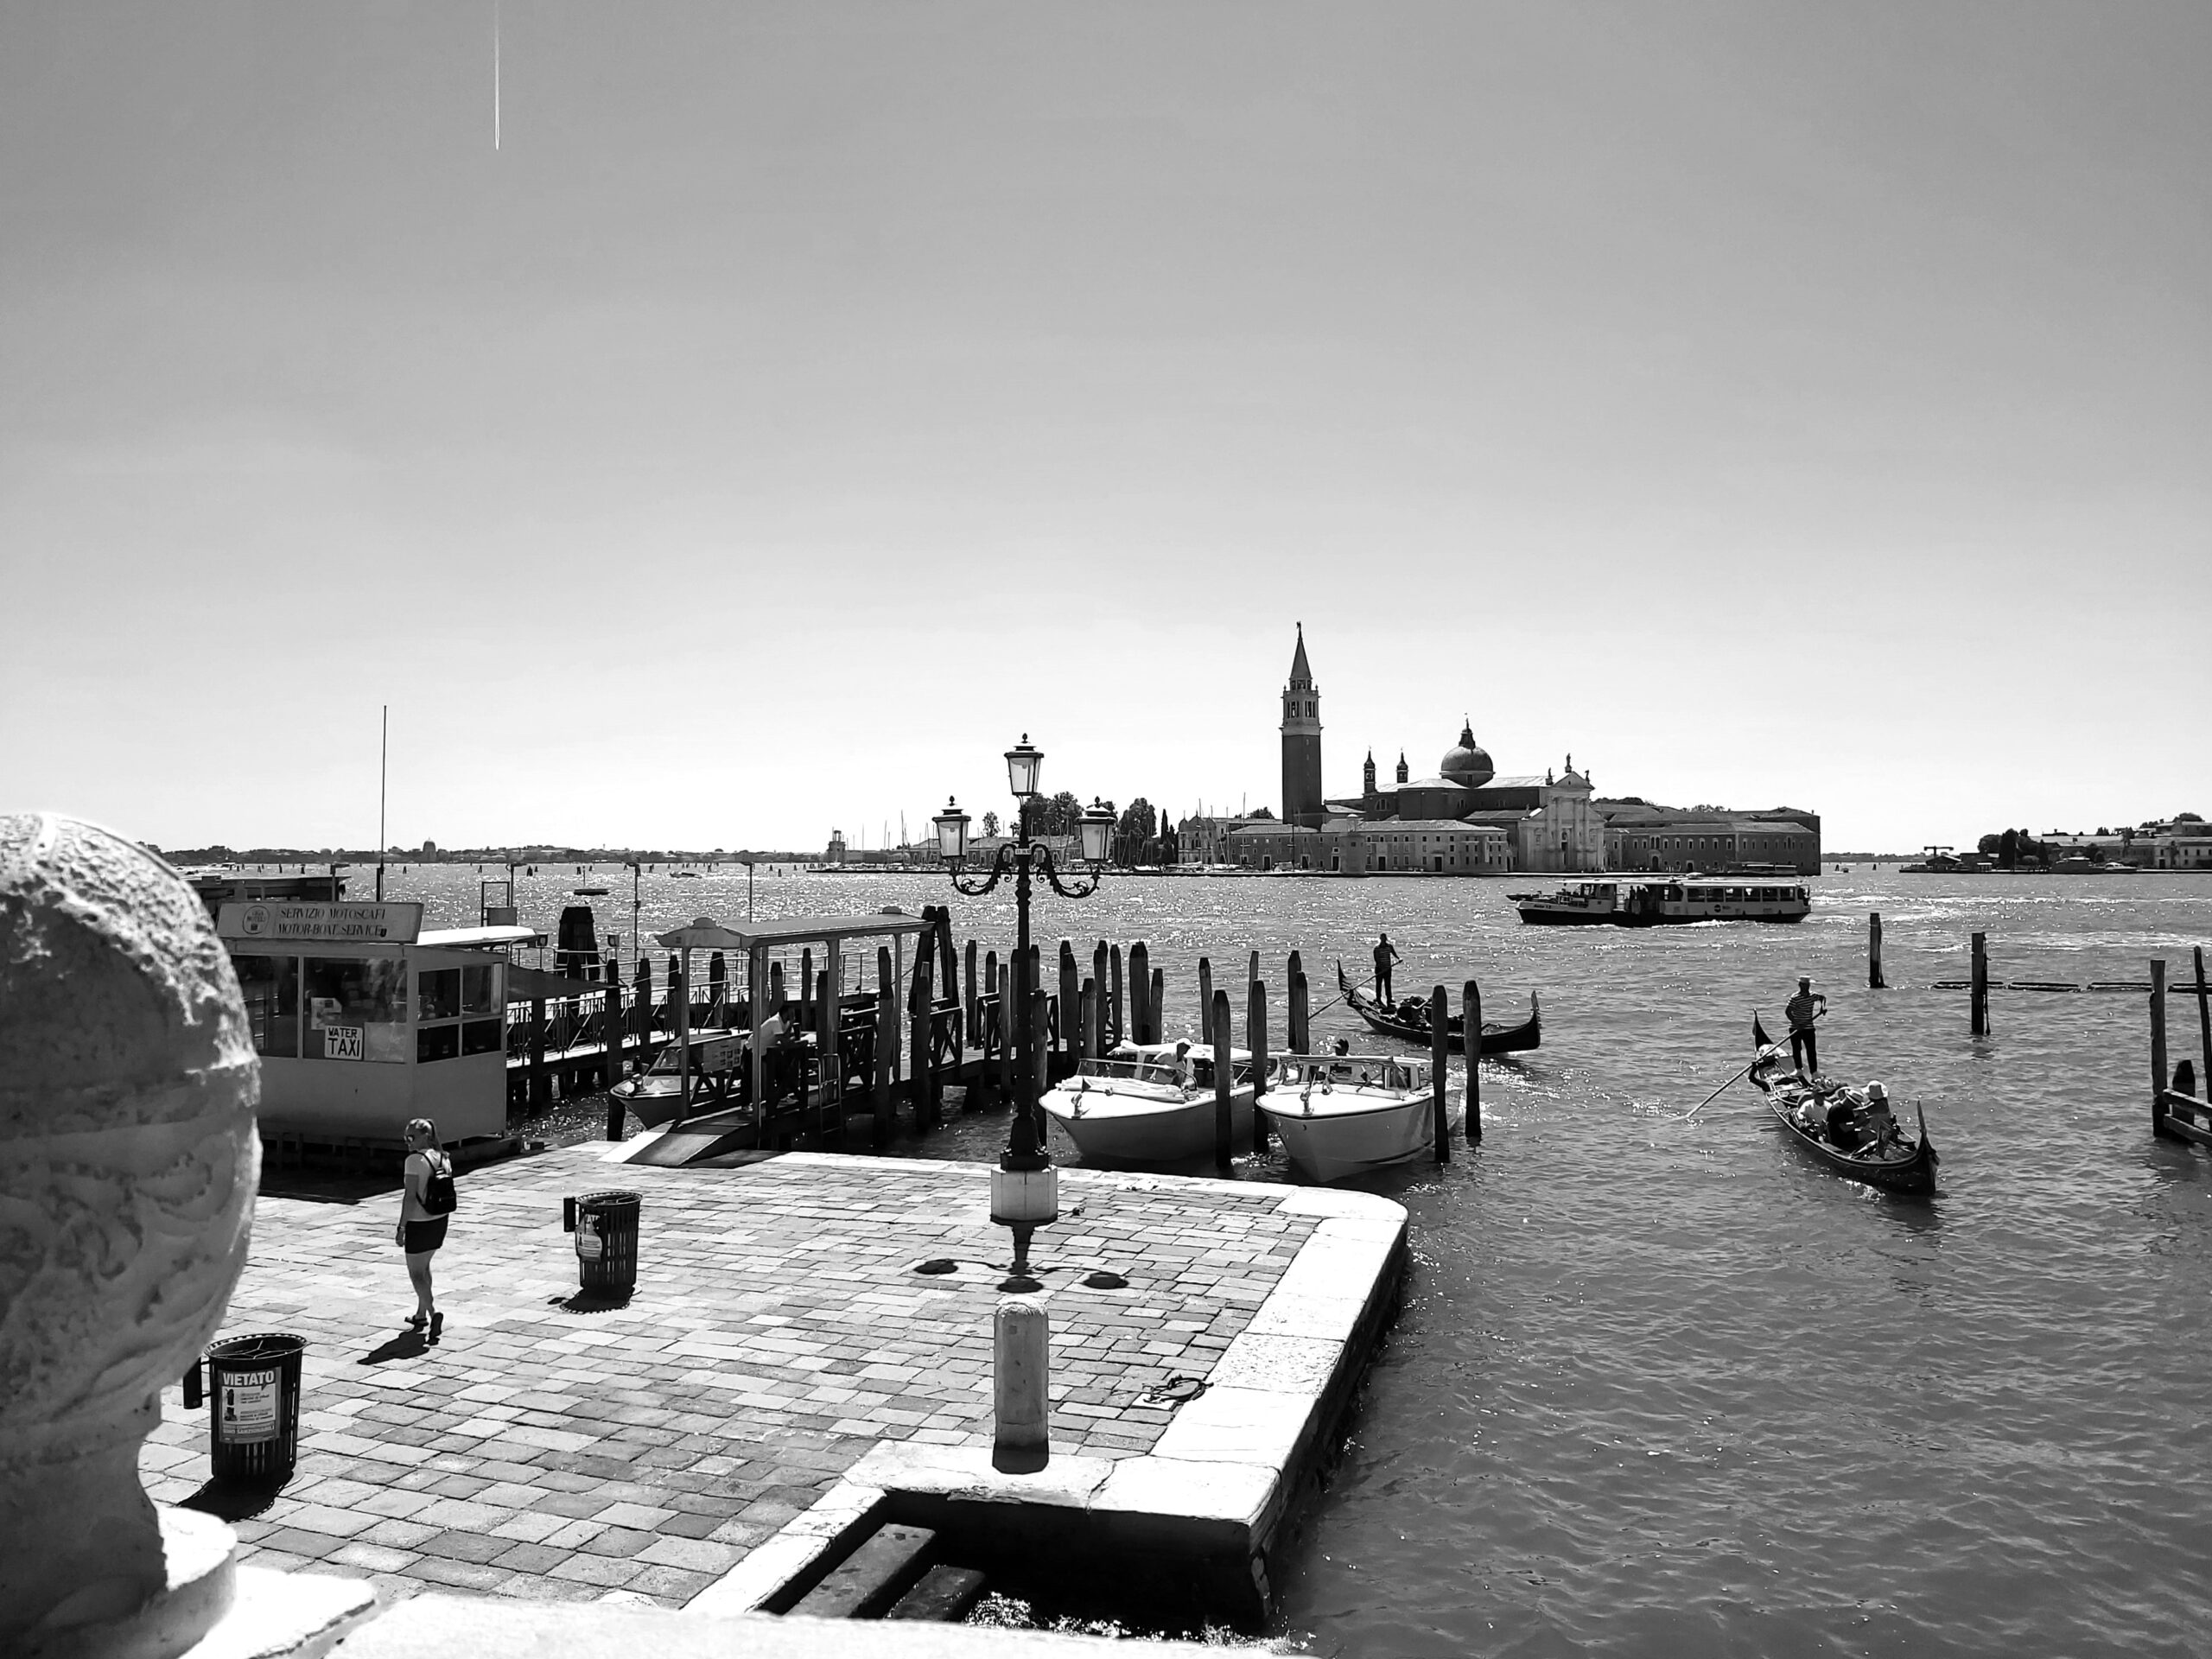 A black and white shot of the canal in Venice, Italy